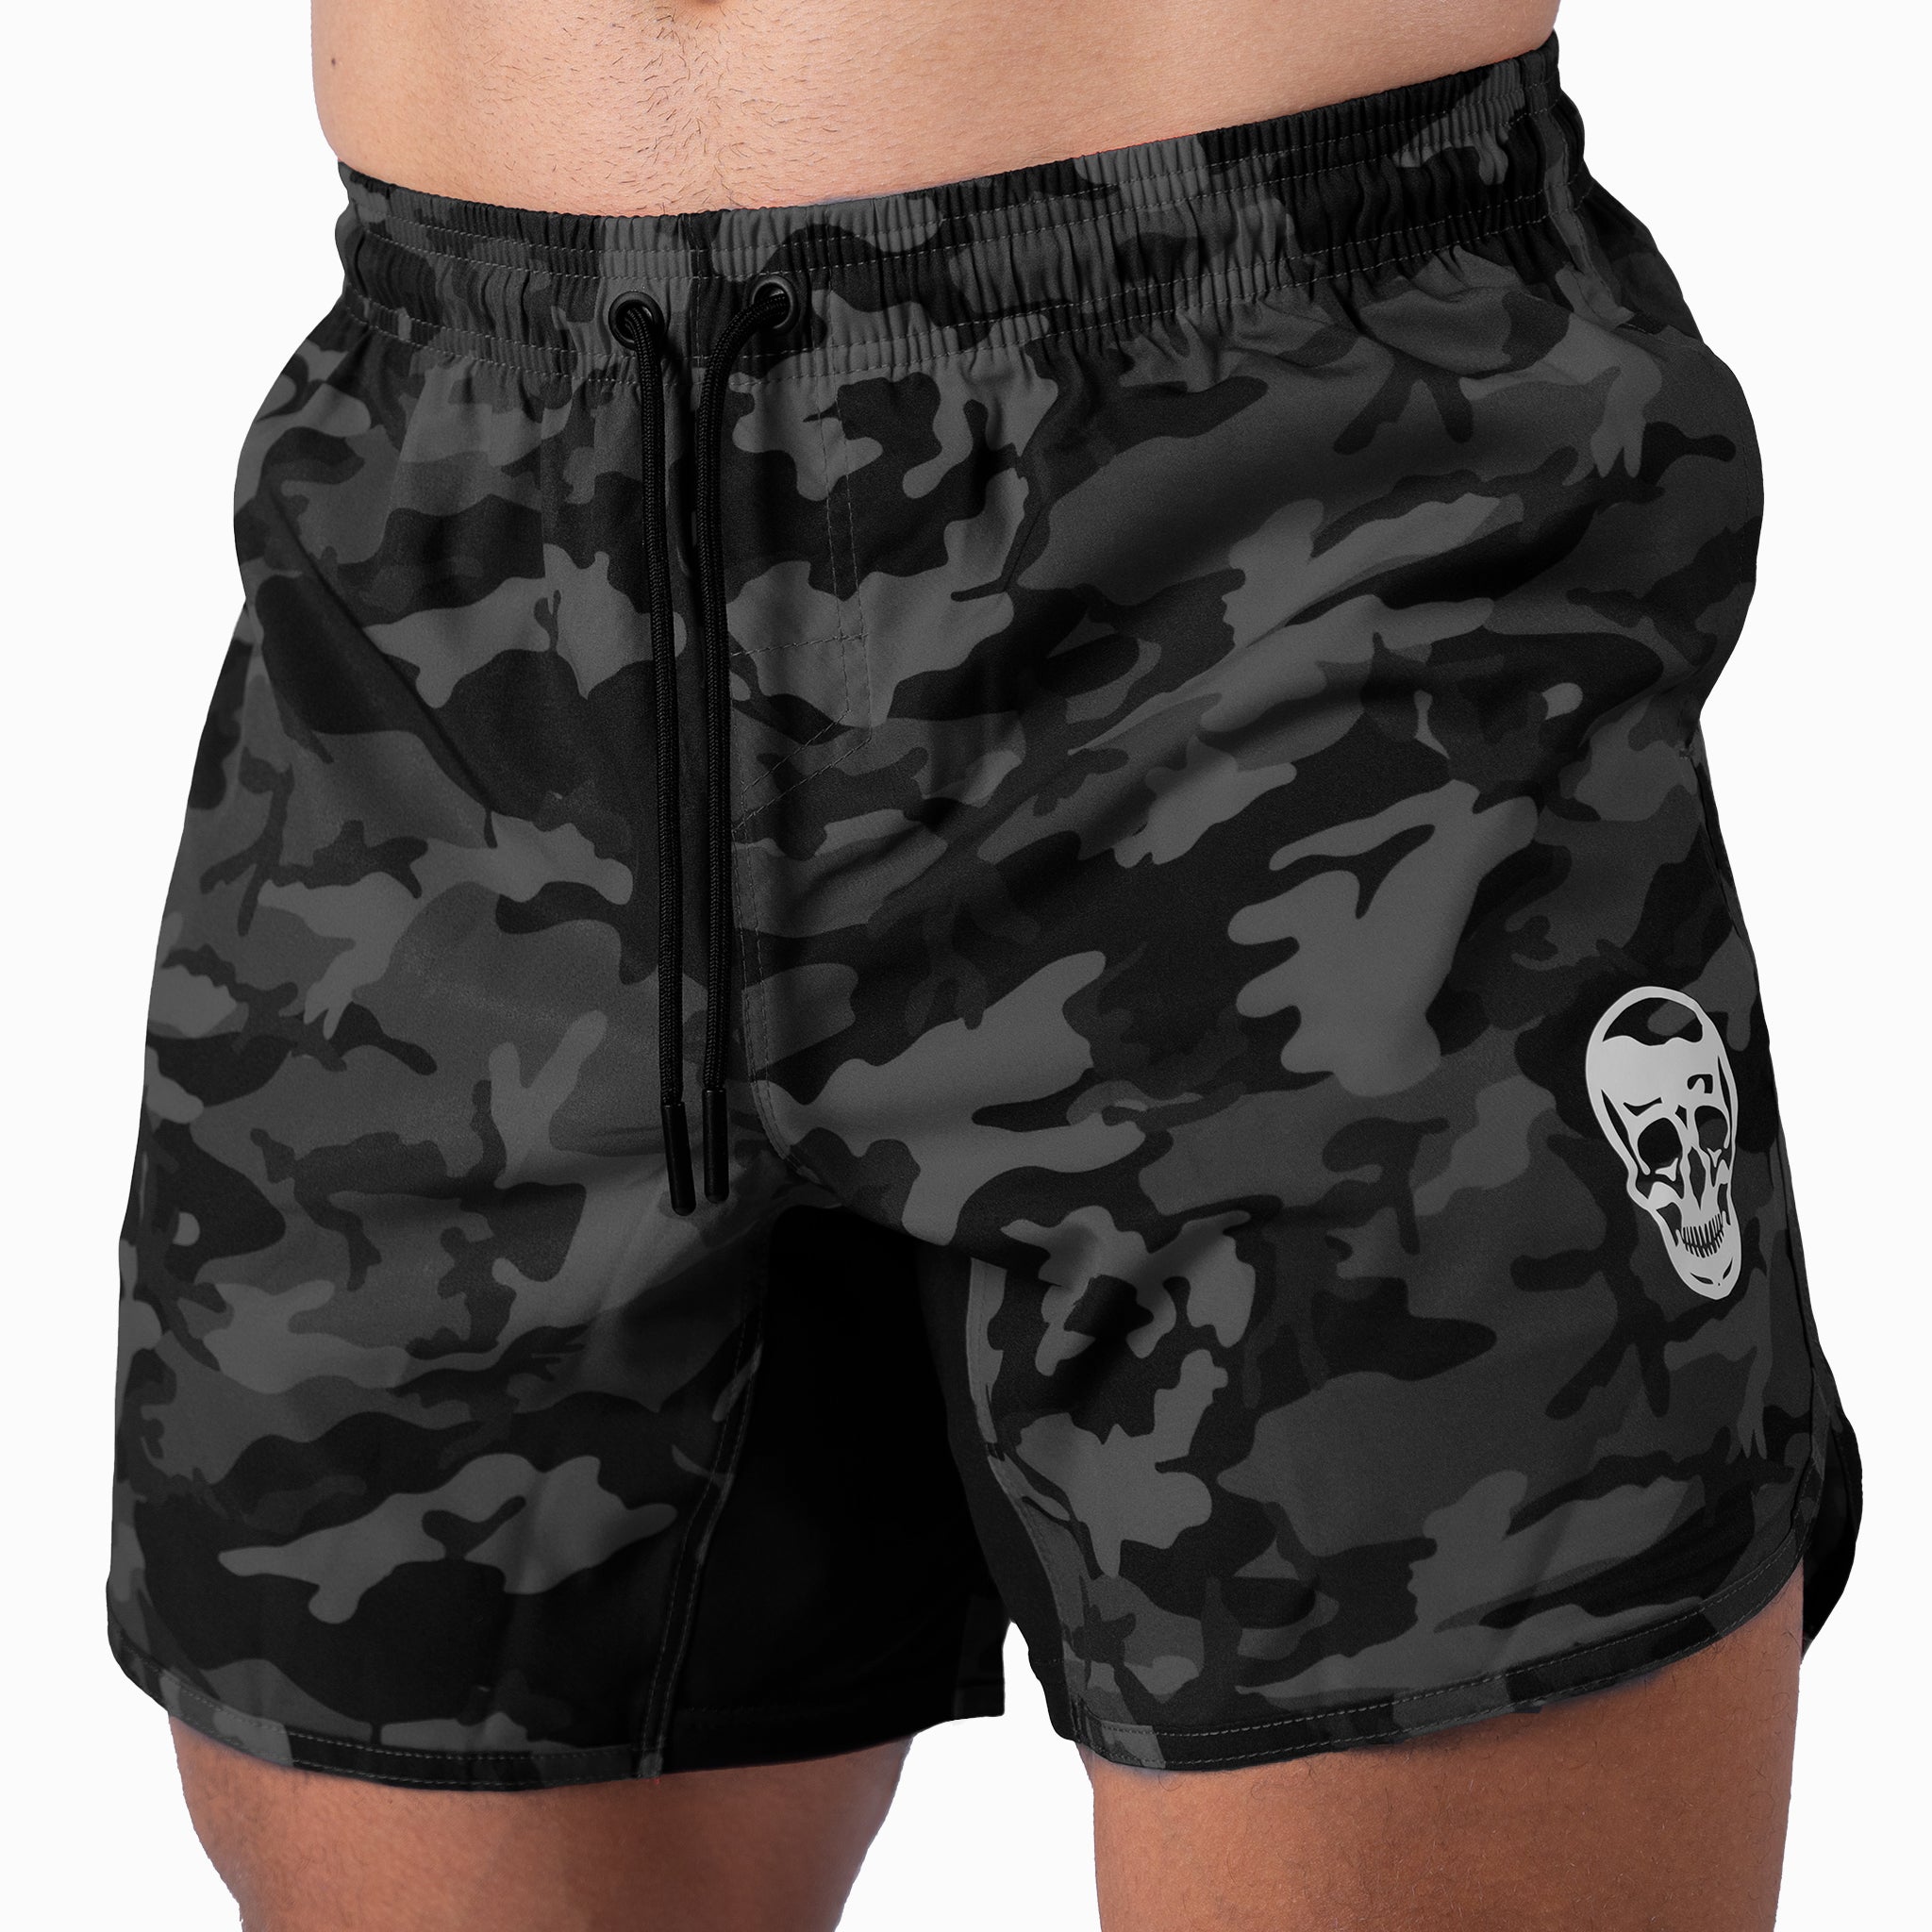 gr training shorts midnight camo cropped front